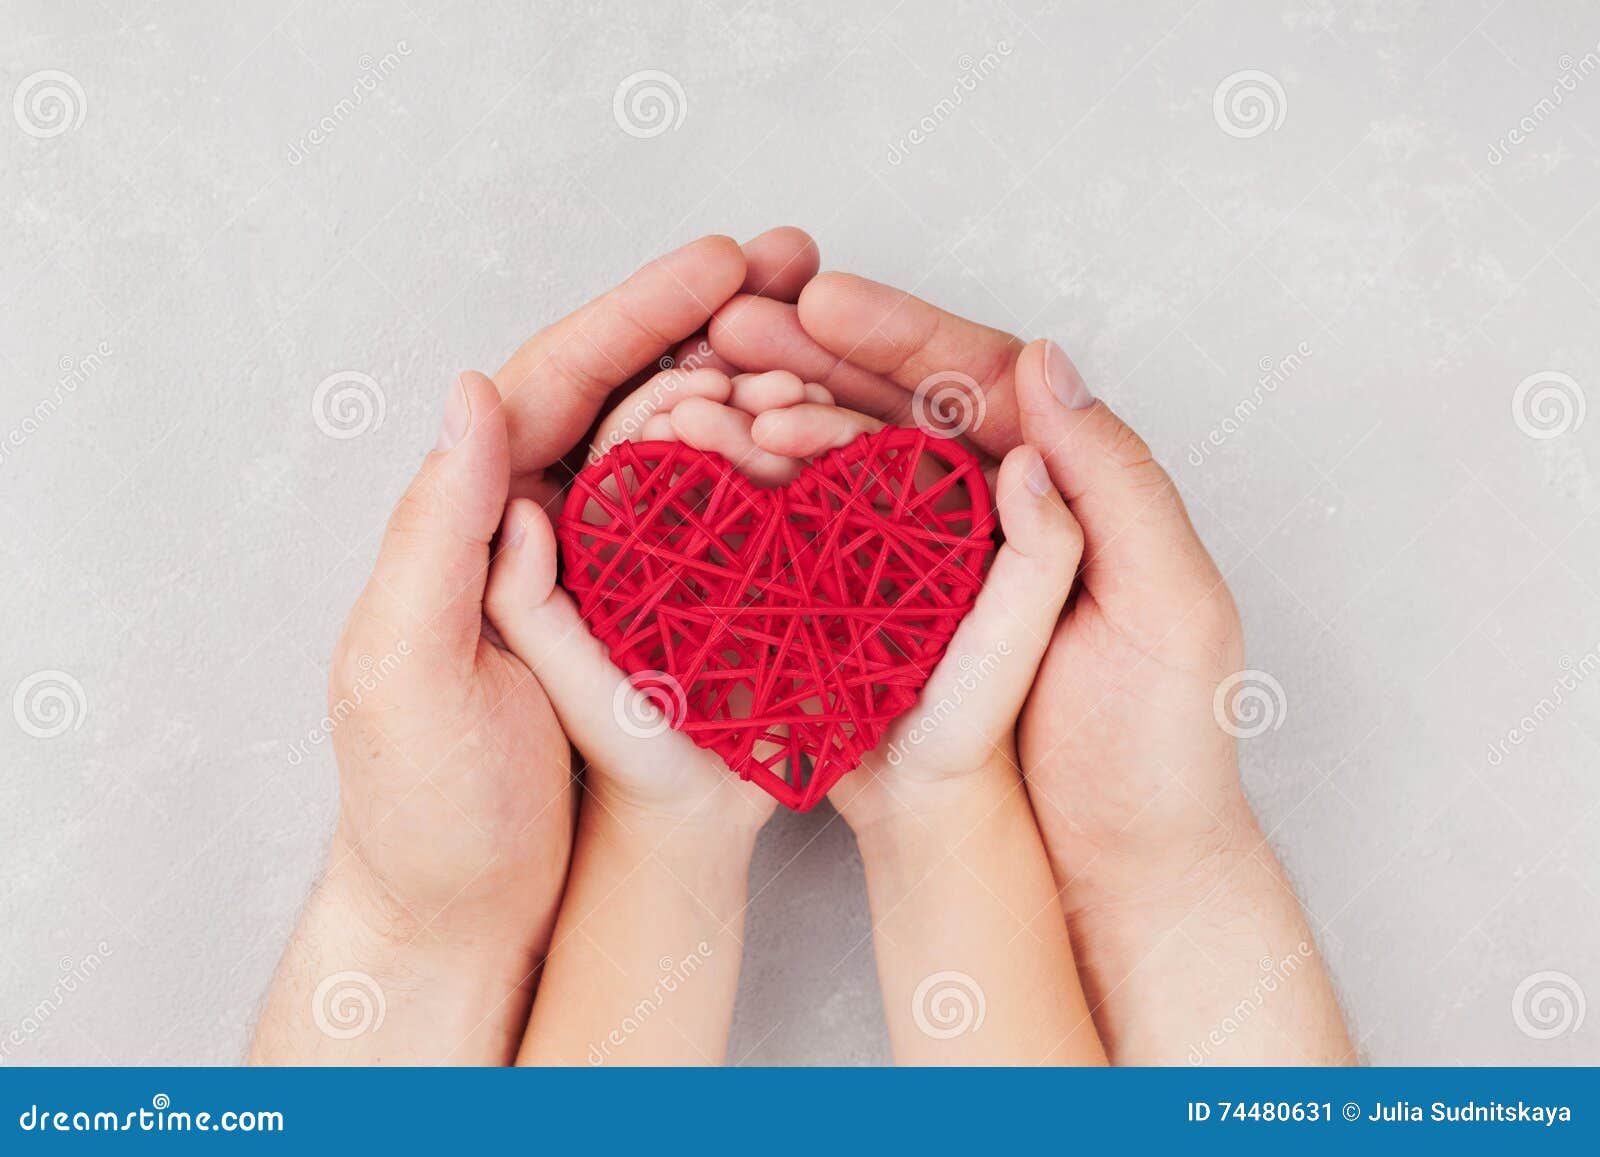 adult and child holding red heart in hands top view. family relationships, health care, pediatric cardiology concept.